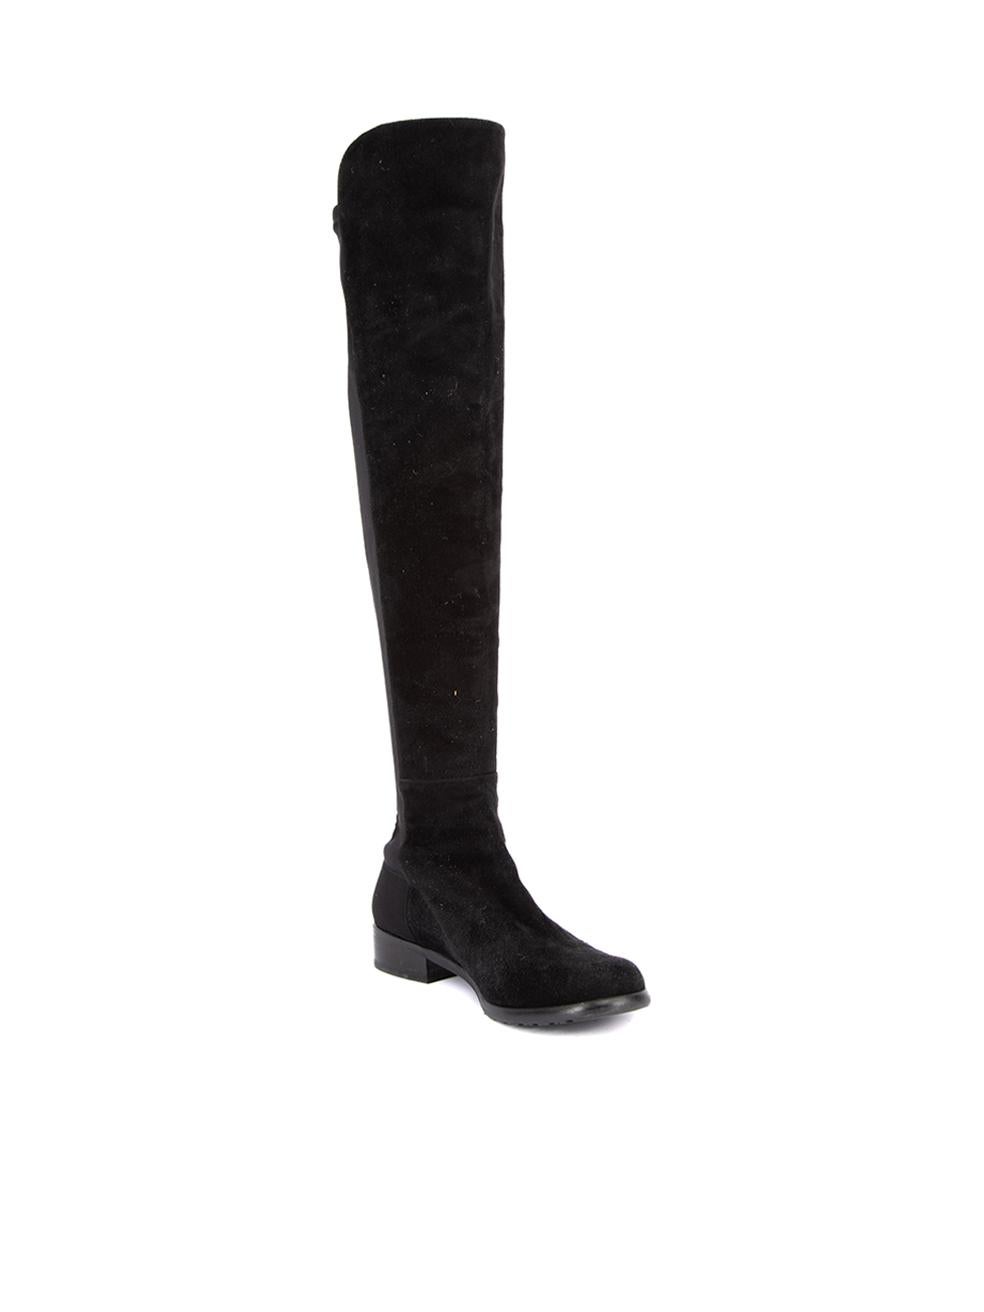 CONDITION is Very good. Minimal wear to boots is evident. Minimal wear and scuffs to the suede exterior on this used Stuart Weitzman x Russell Bromley designer resale item.   Details  Black Suede Over the knee boots Round toe Low black heel